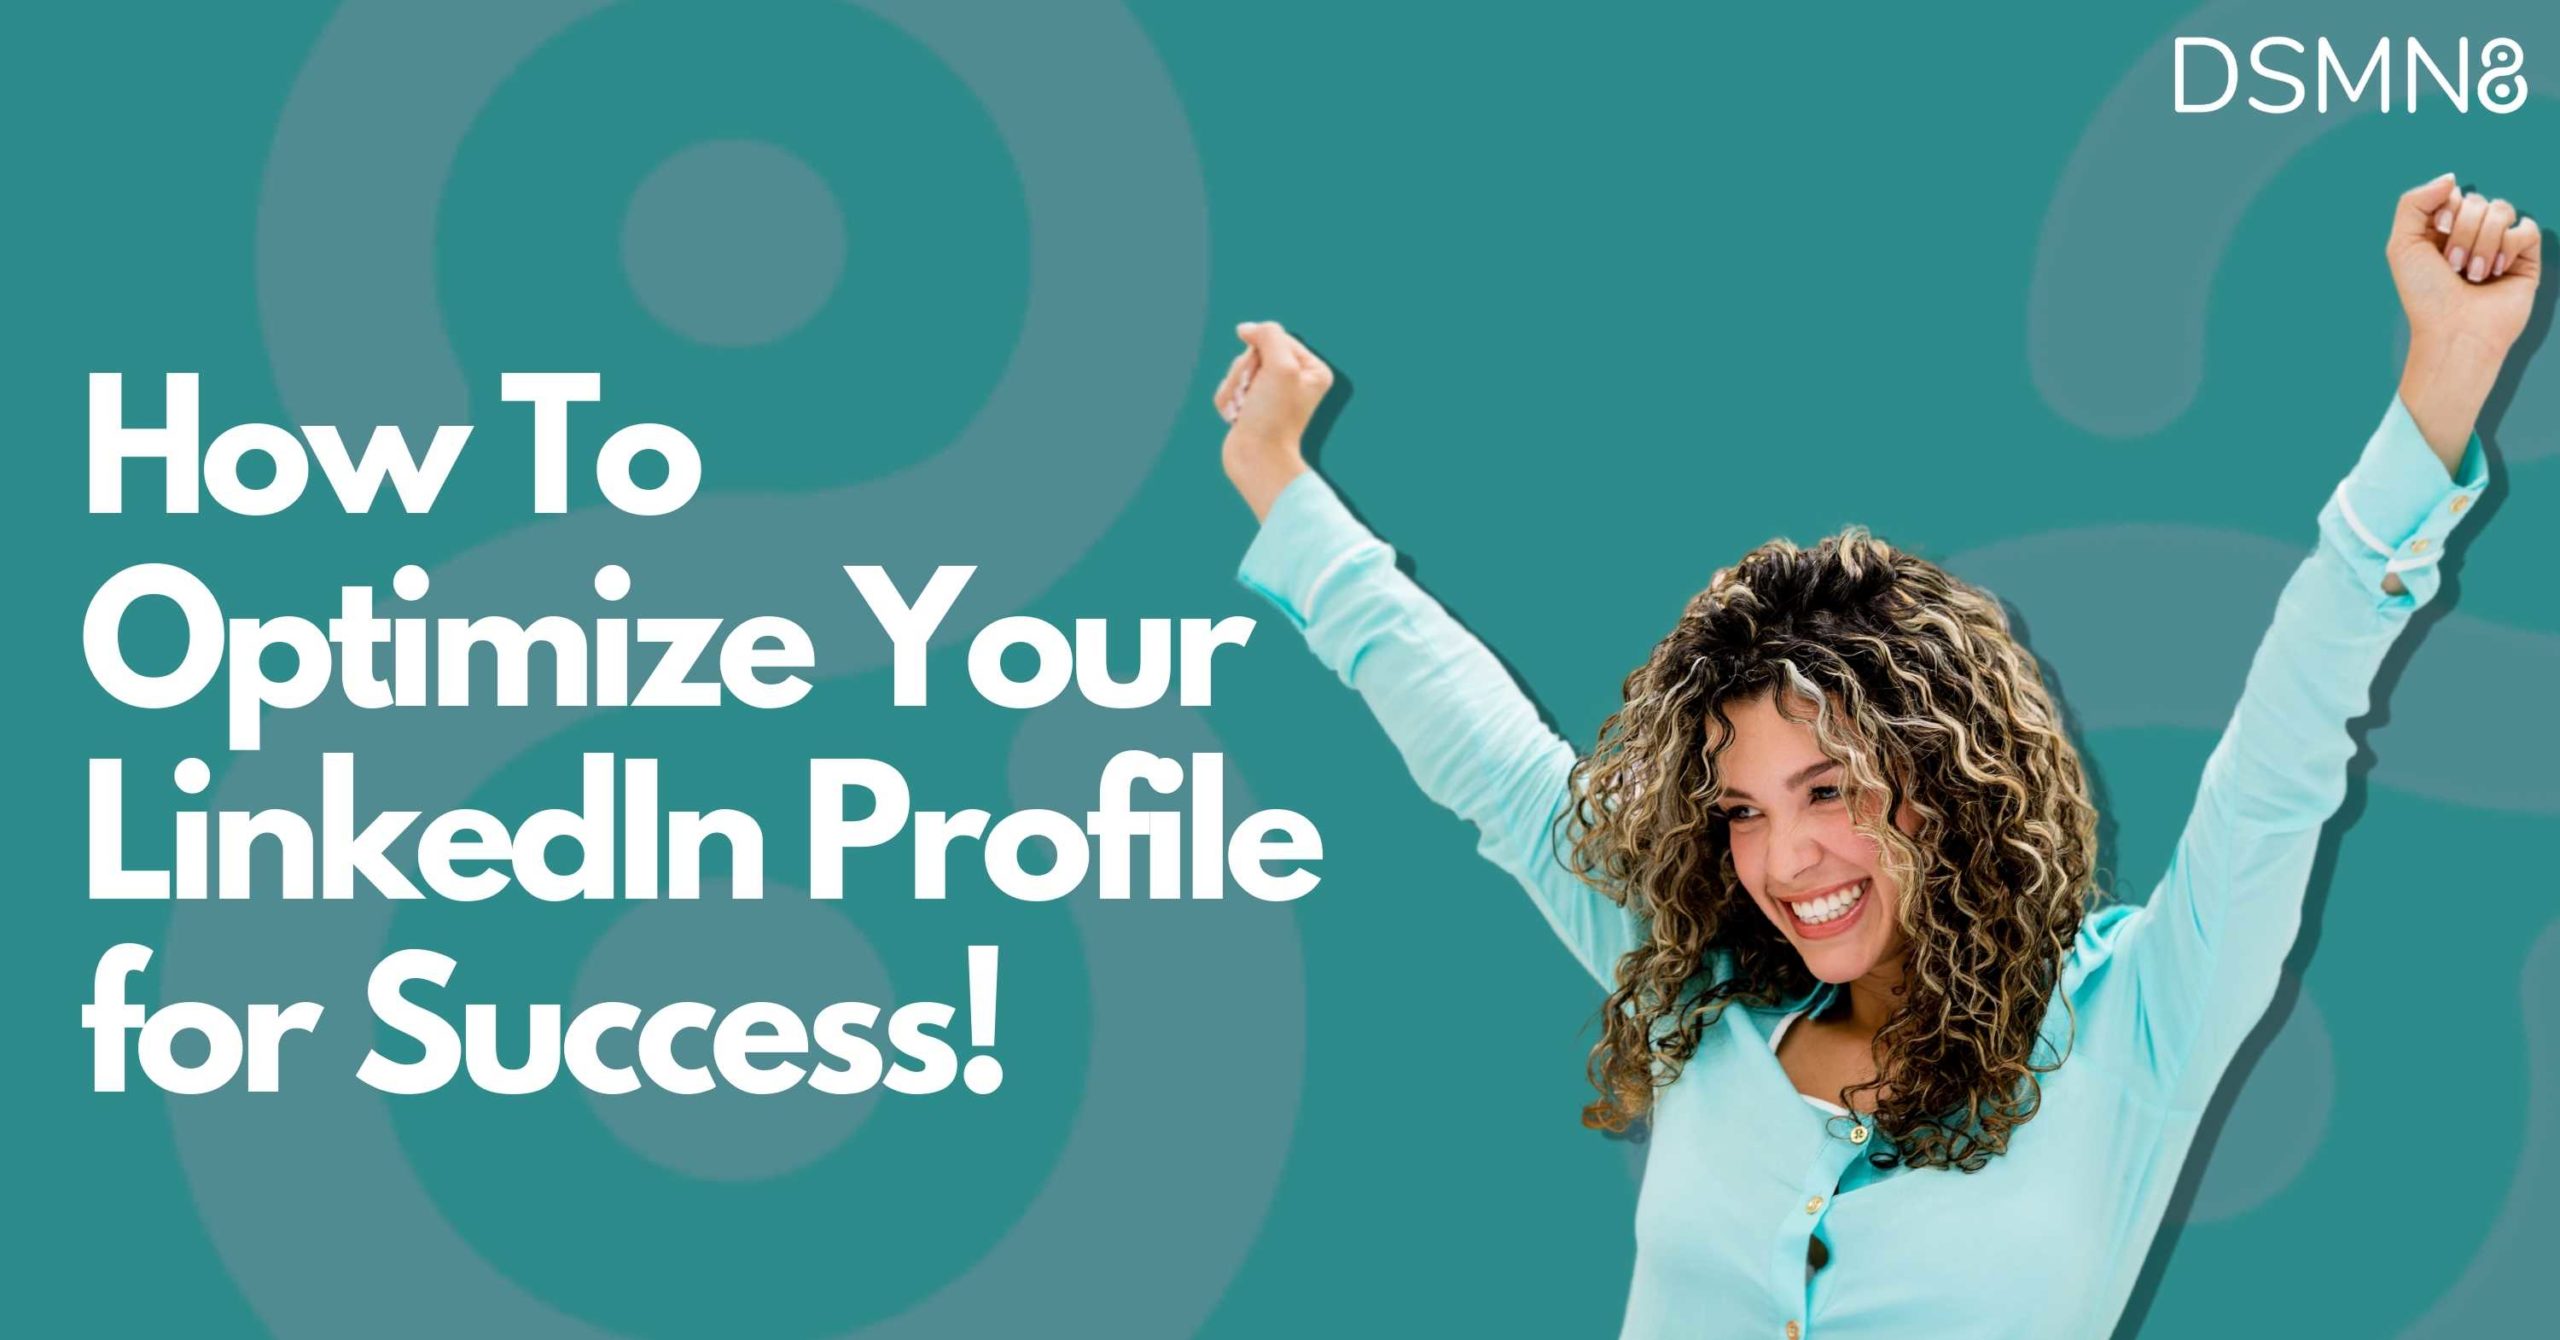 How To Optimize Your LinkedIn Profile for Success